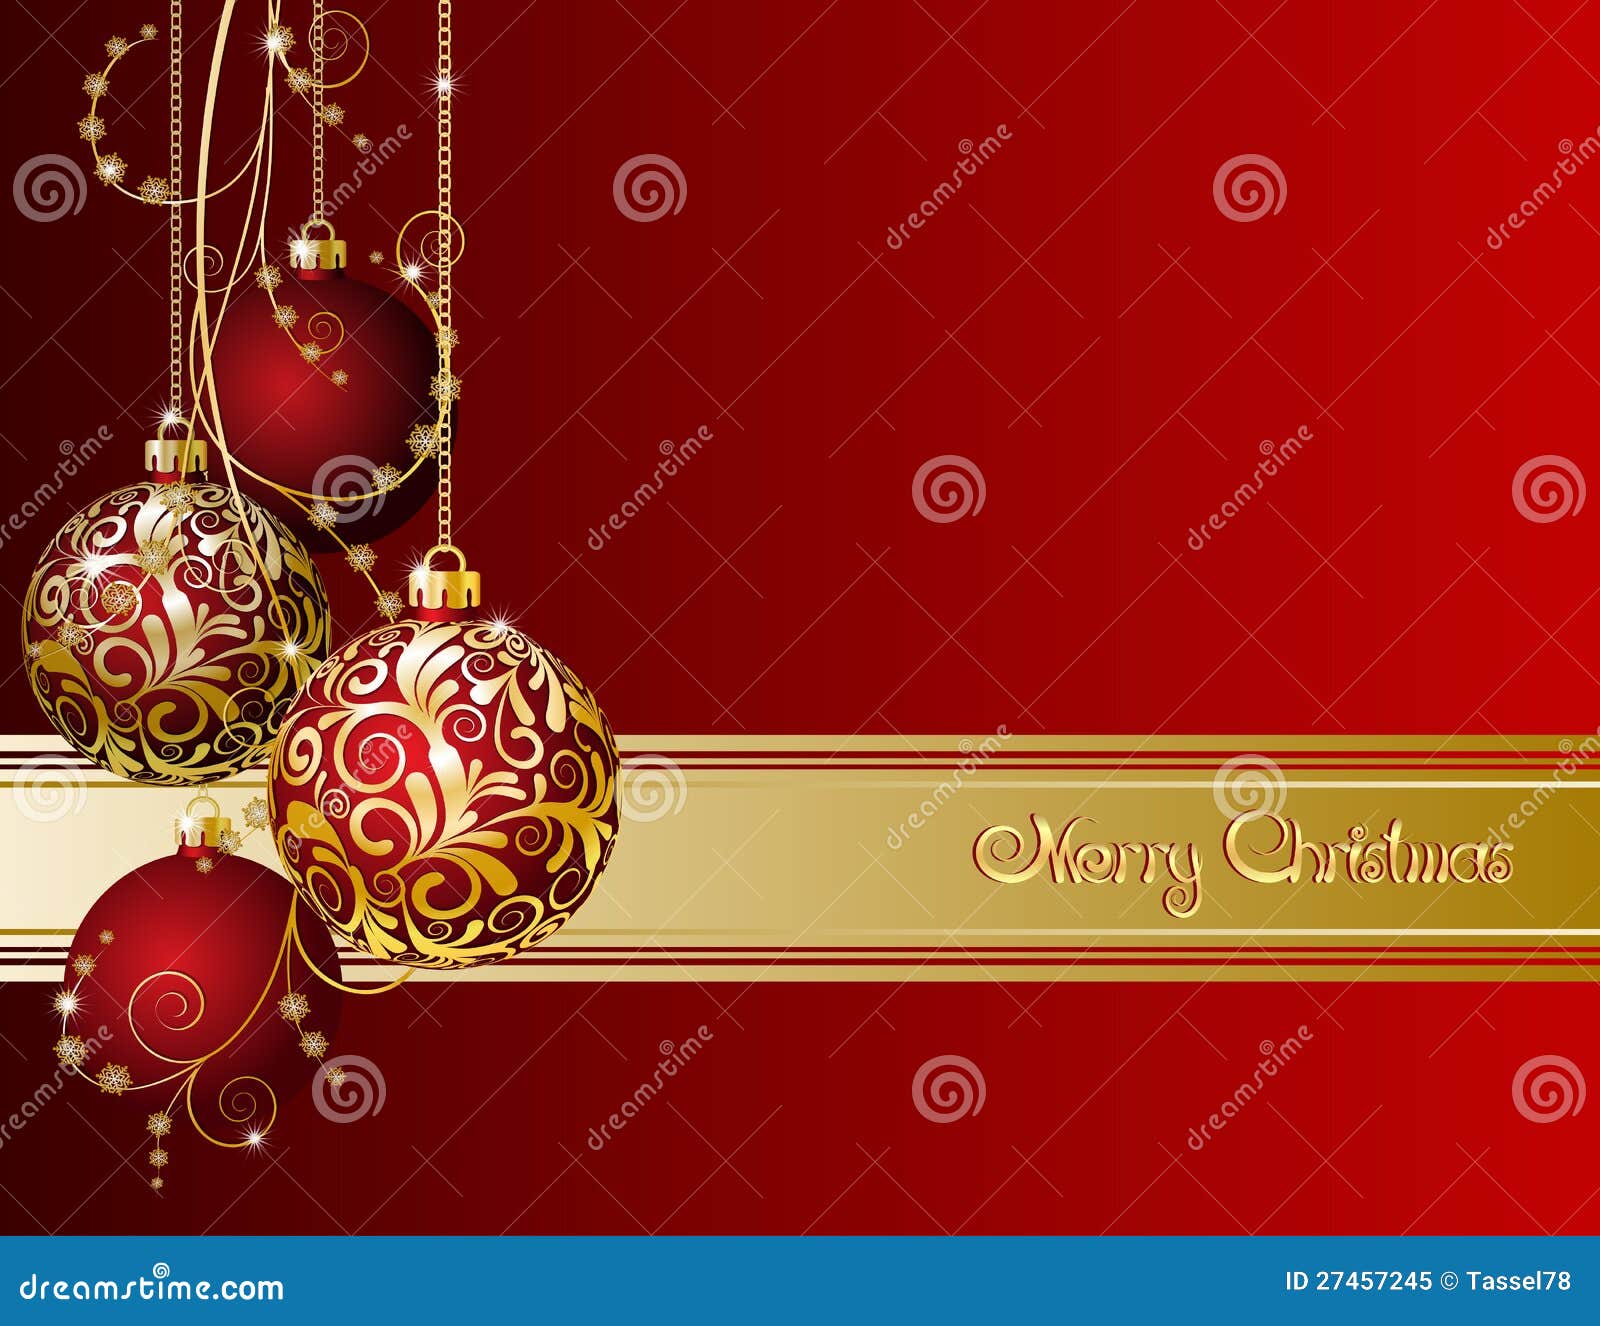 Red Christmas card stock vector. Illustration of celebration - 27457245